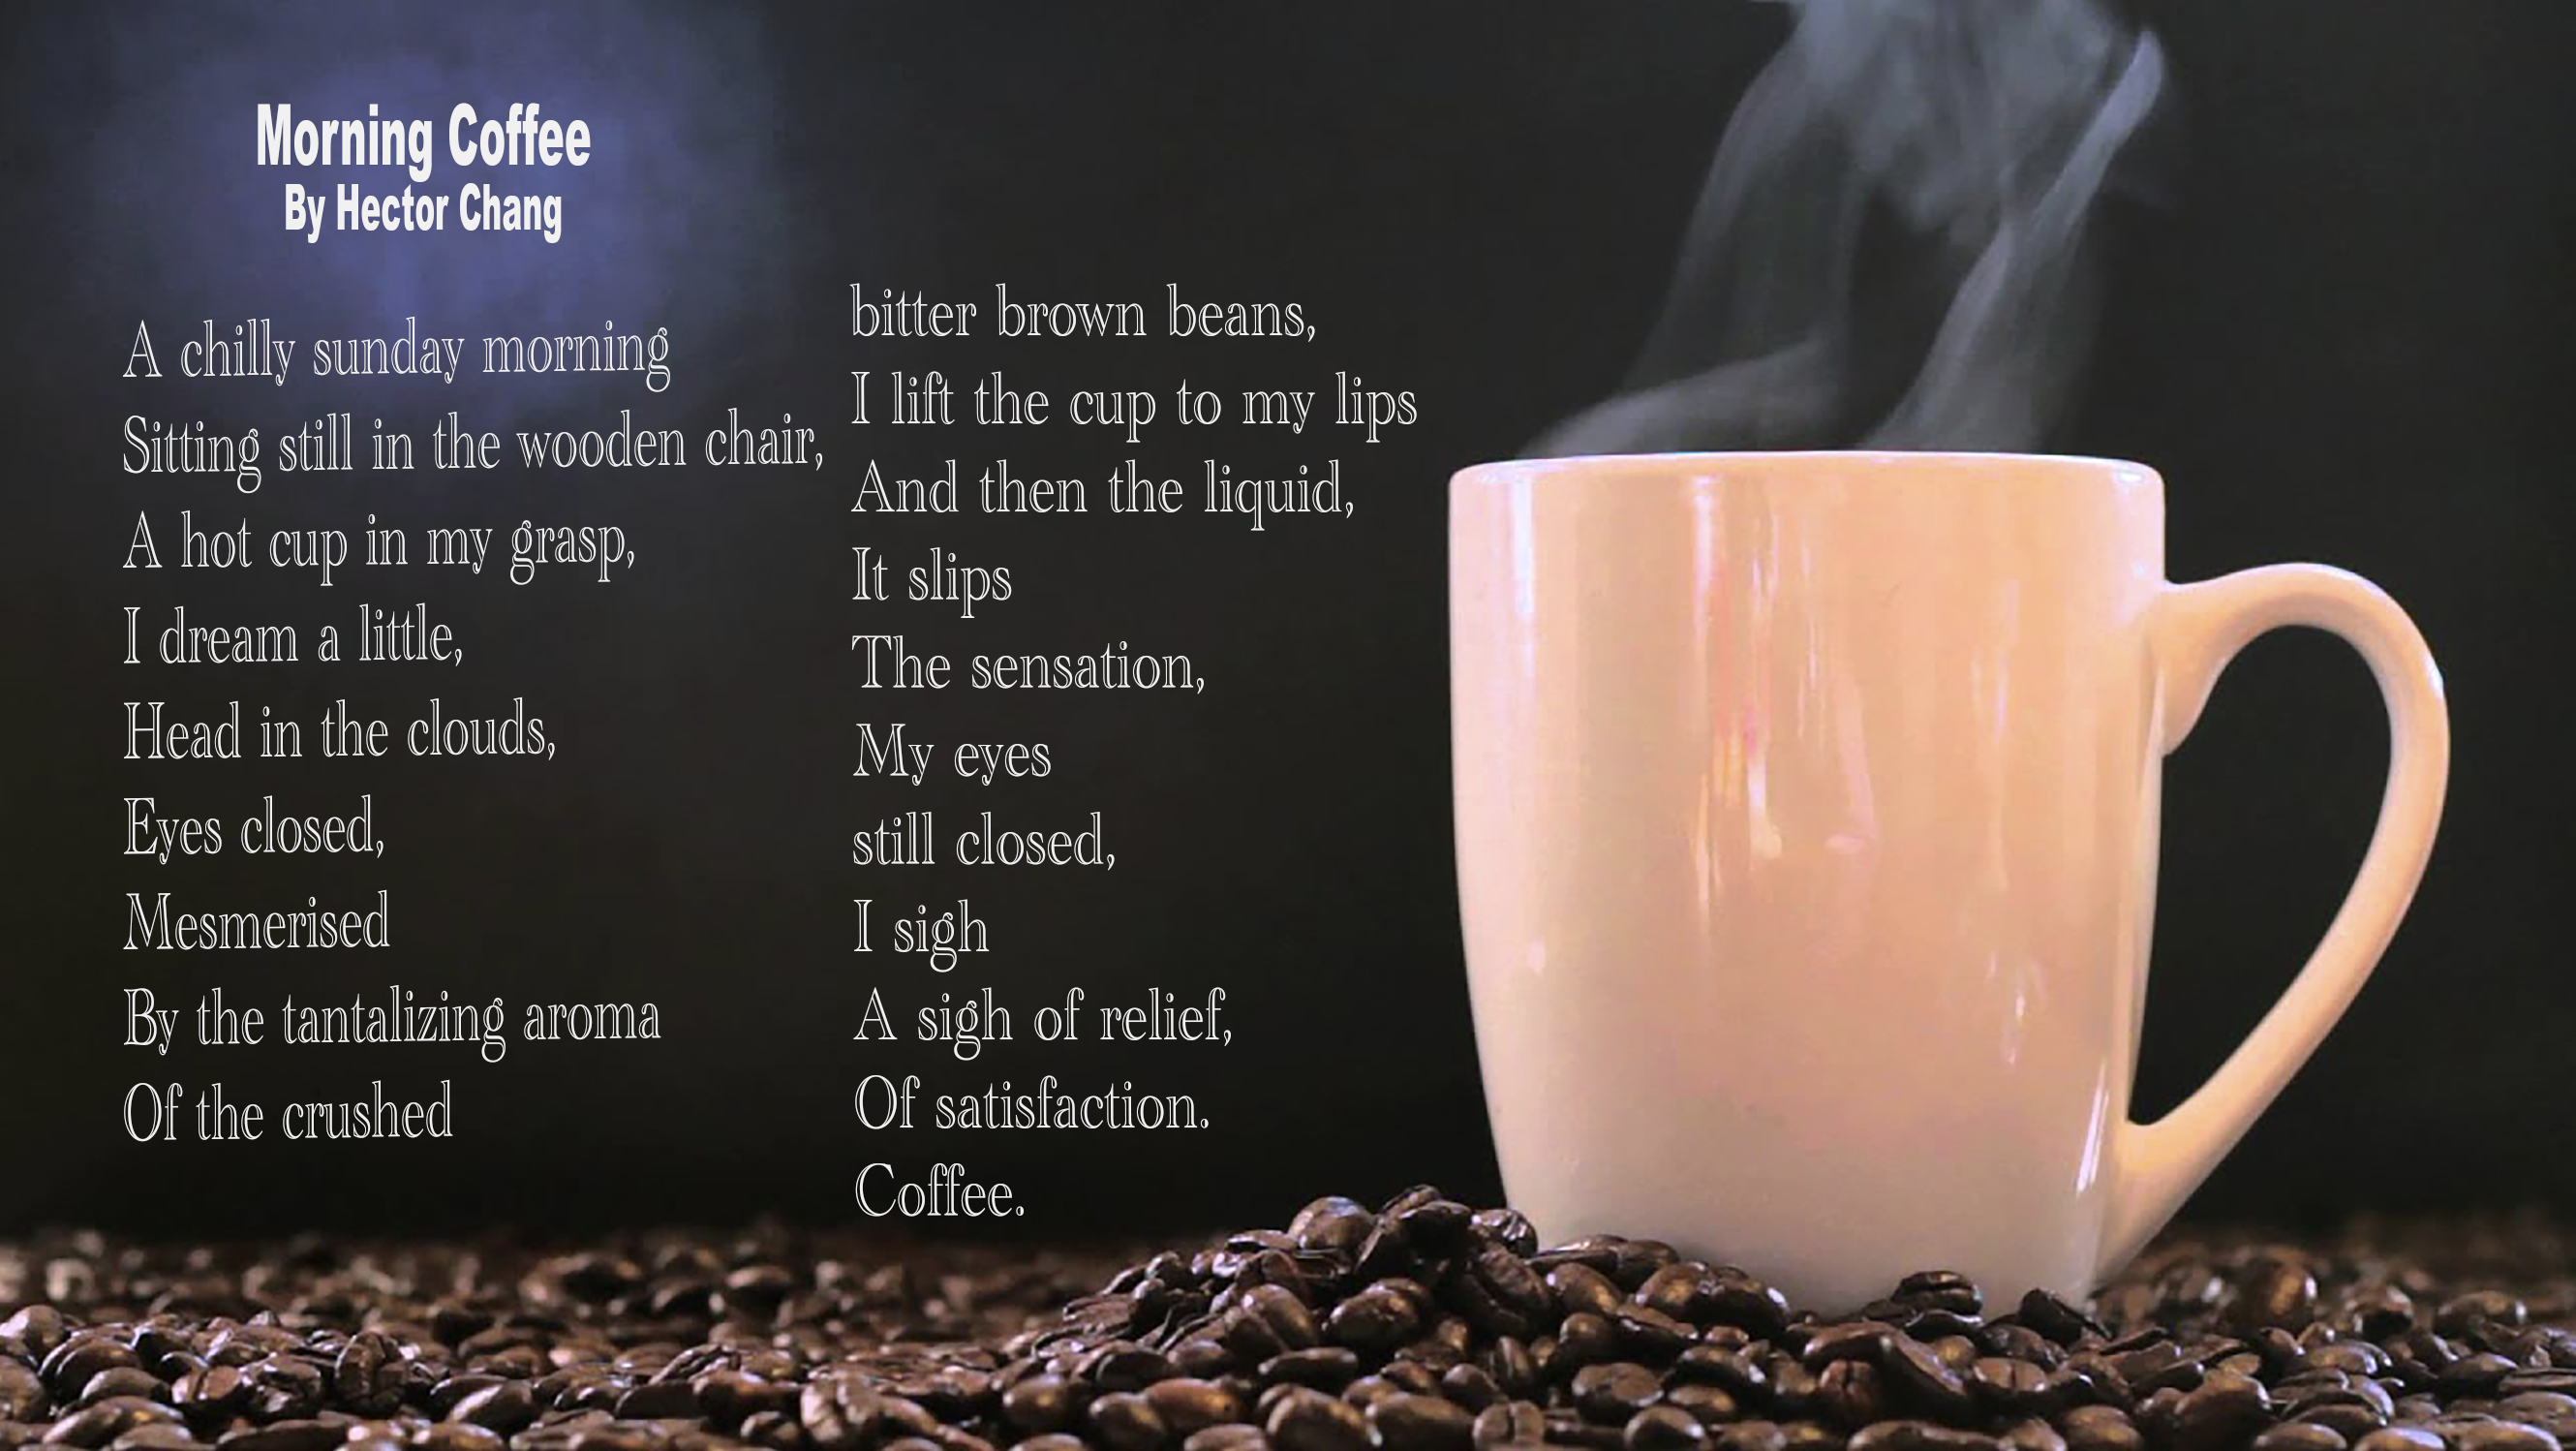 Poem by Hector Chang Morning Coffee